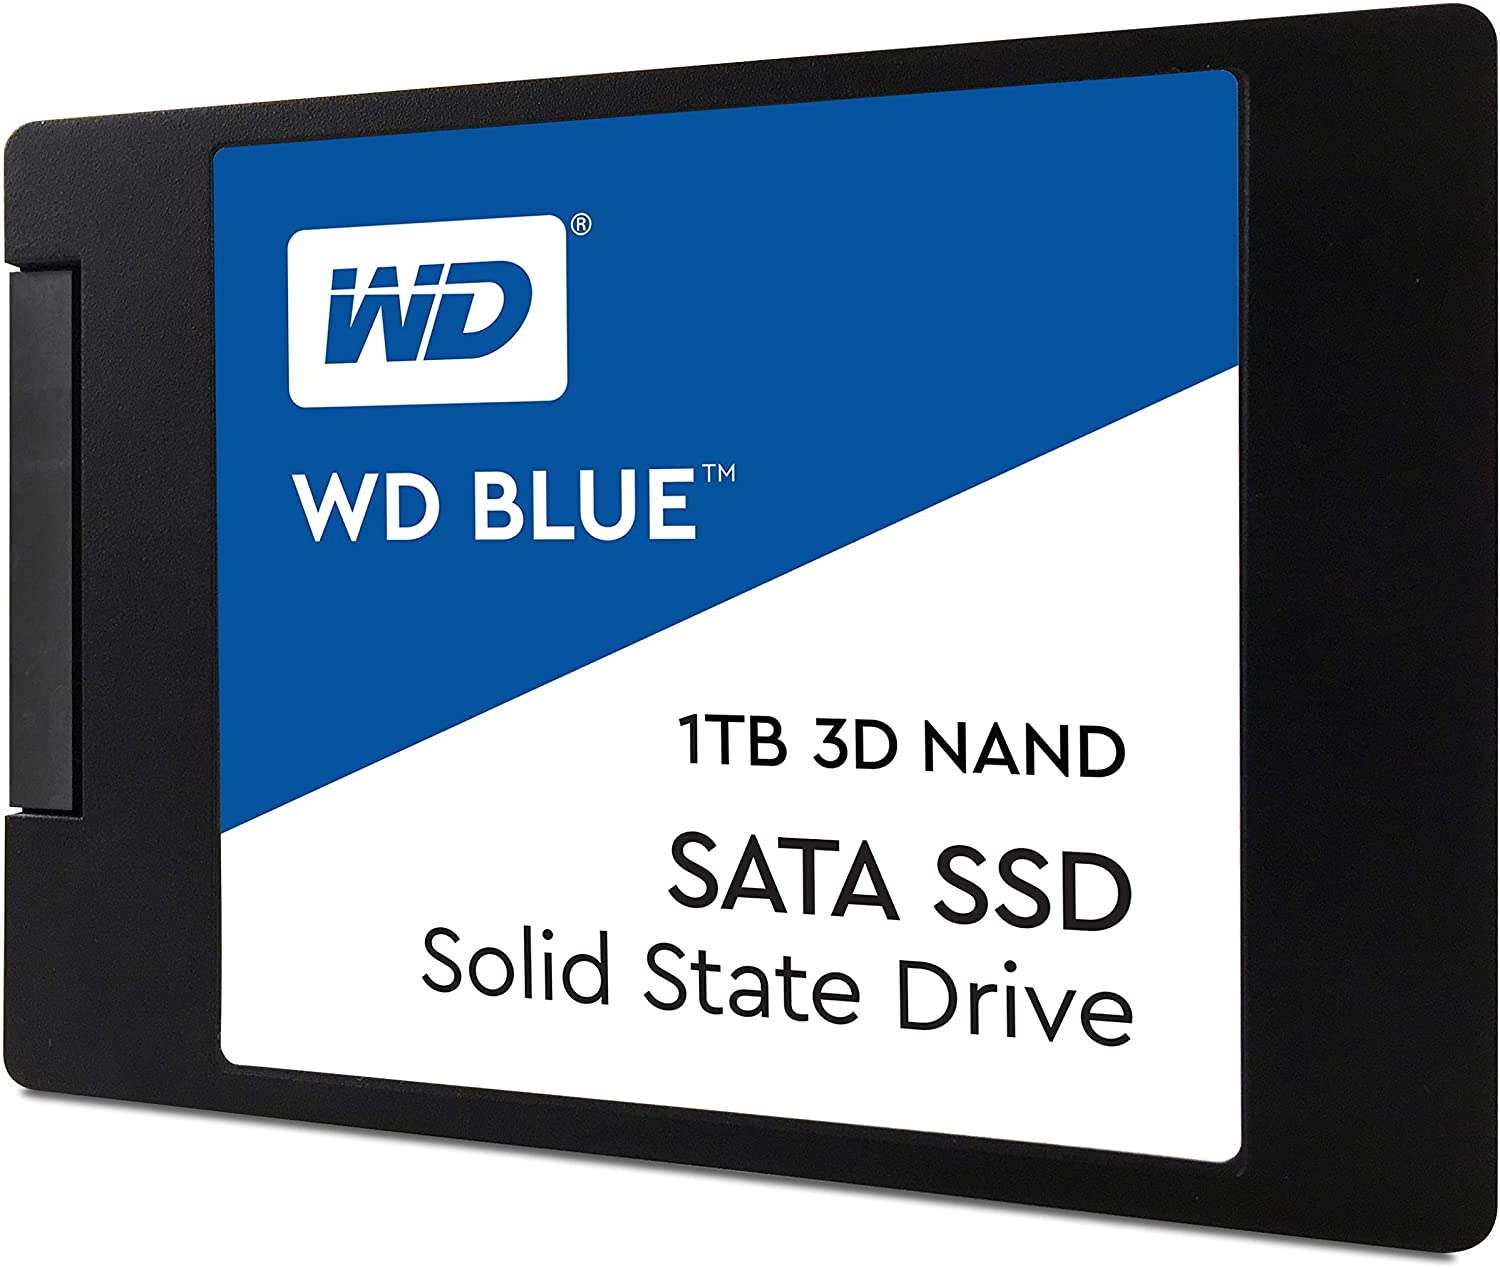 Optimize a wd ssd for macos windows 10